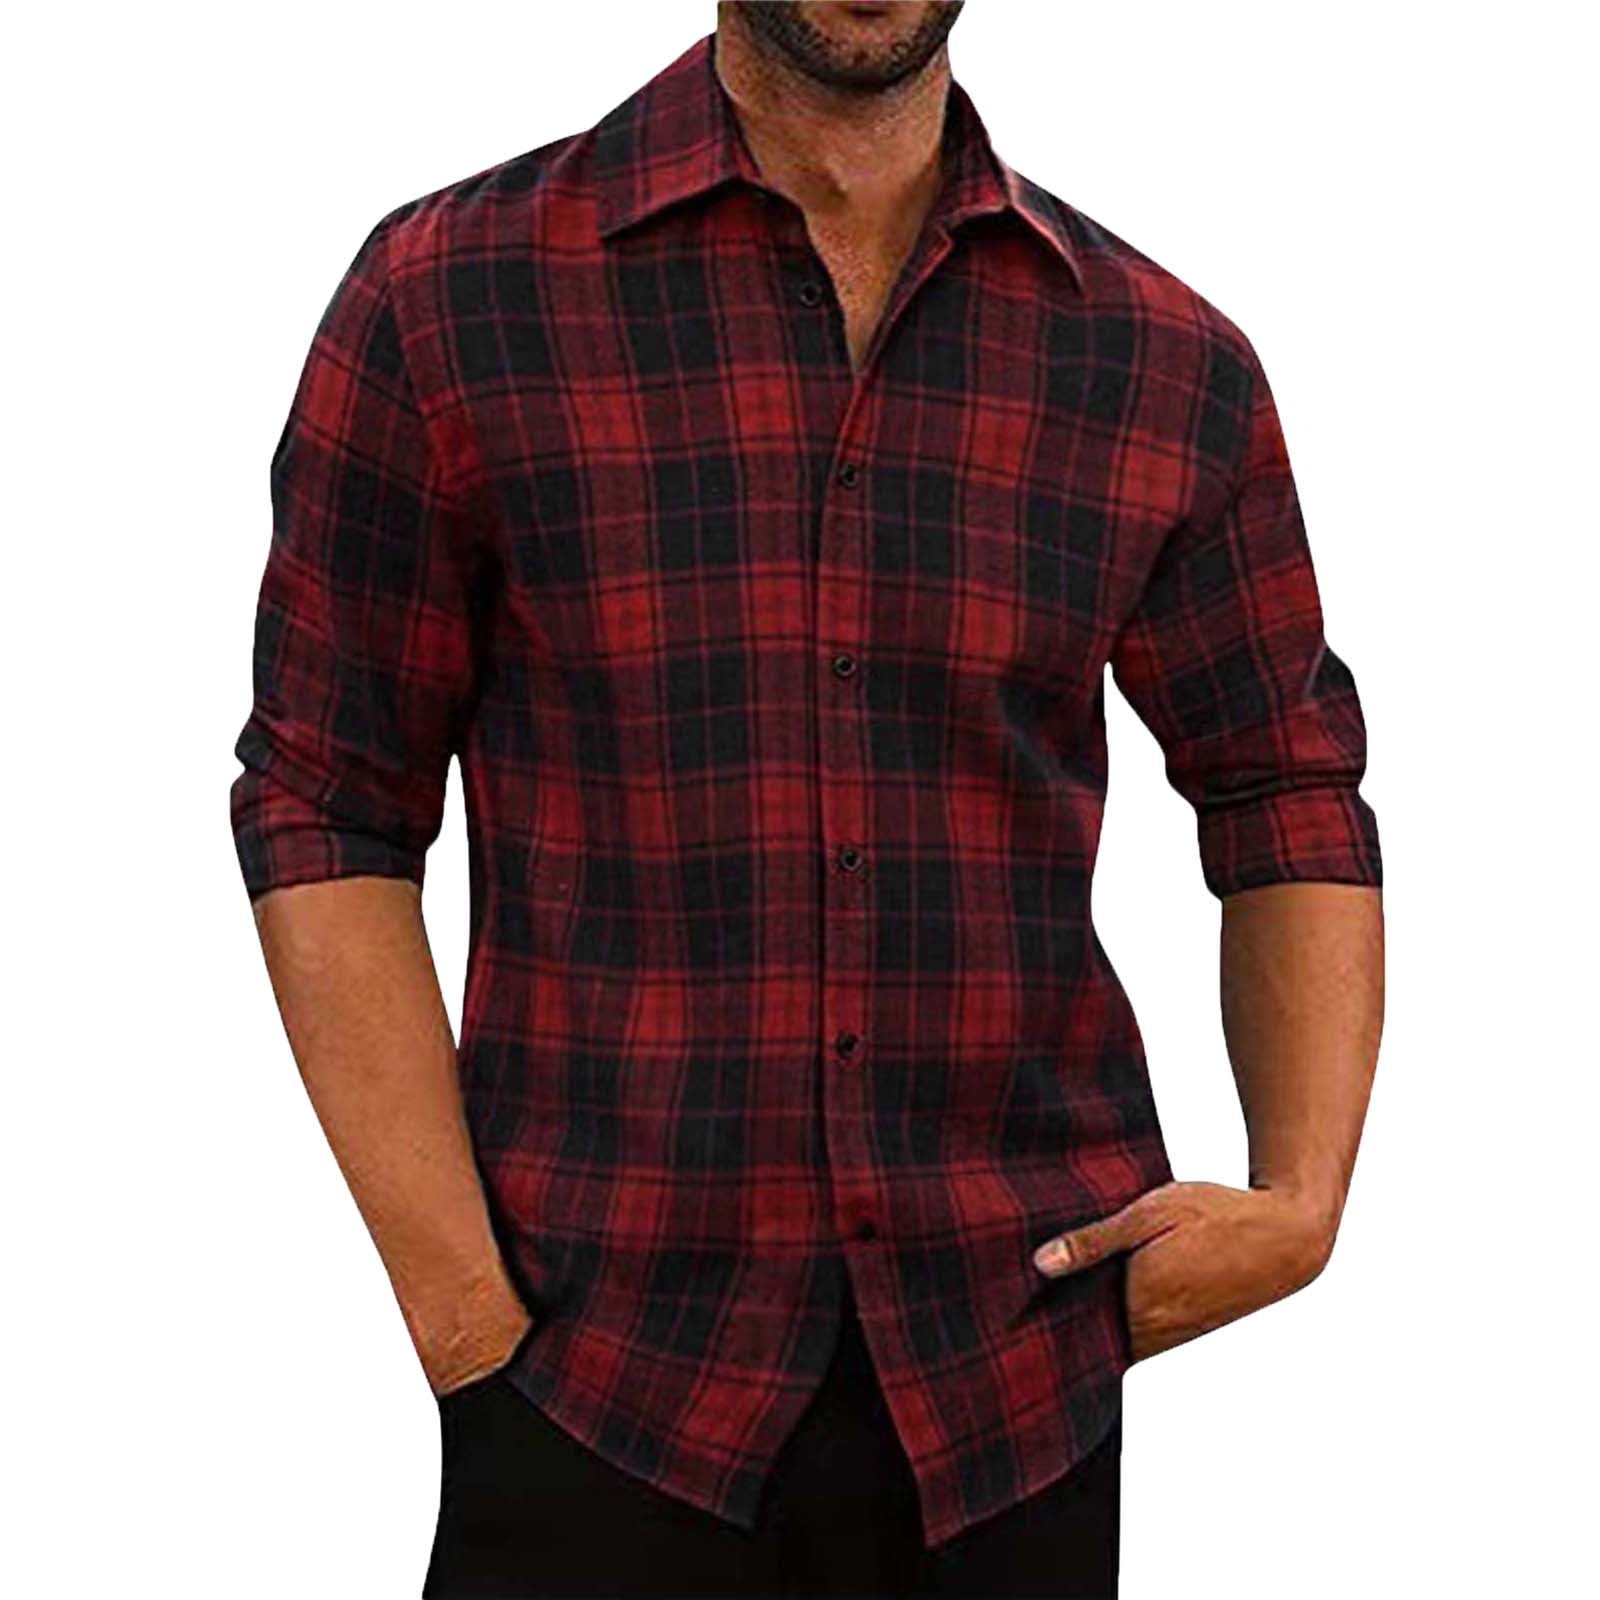 Plaid Shirt for Men Long Sleeve Casual Button-Down Regular Fit